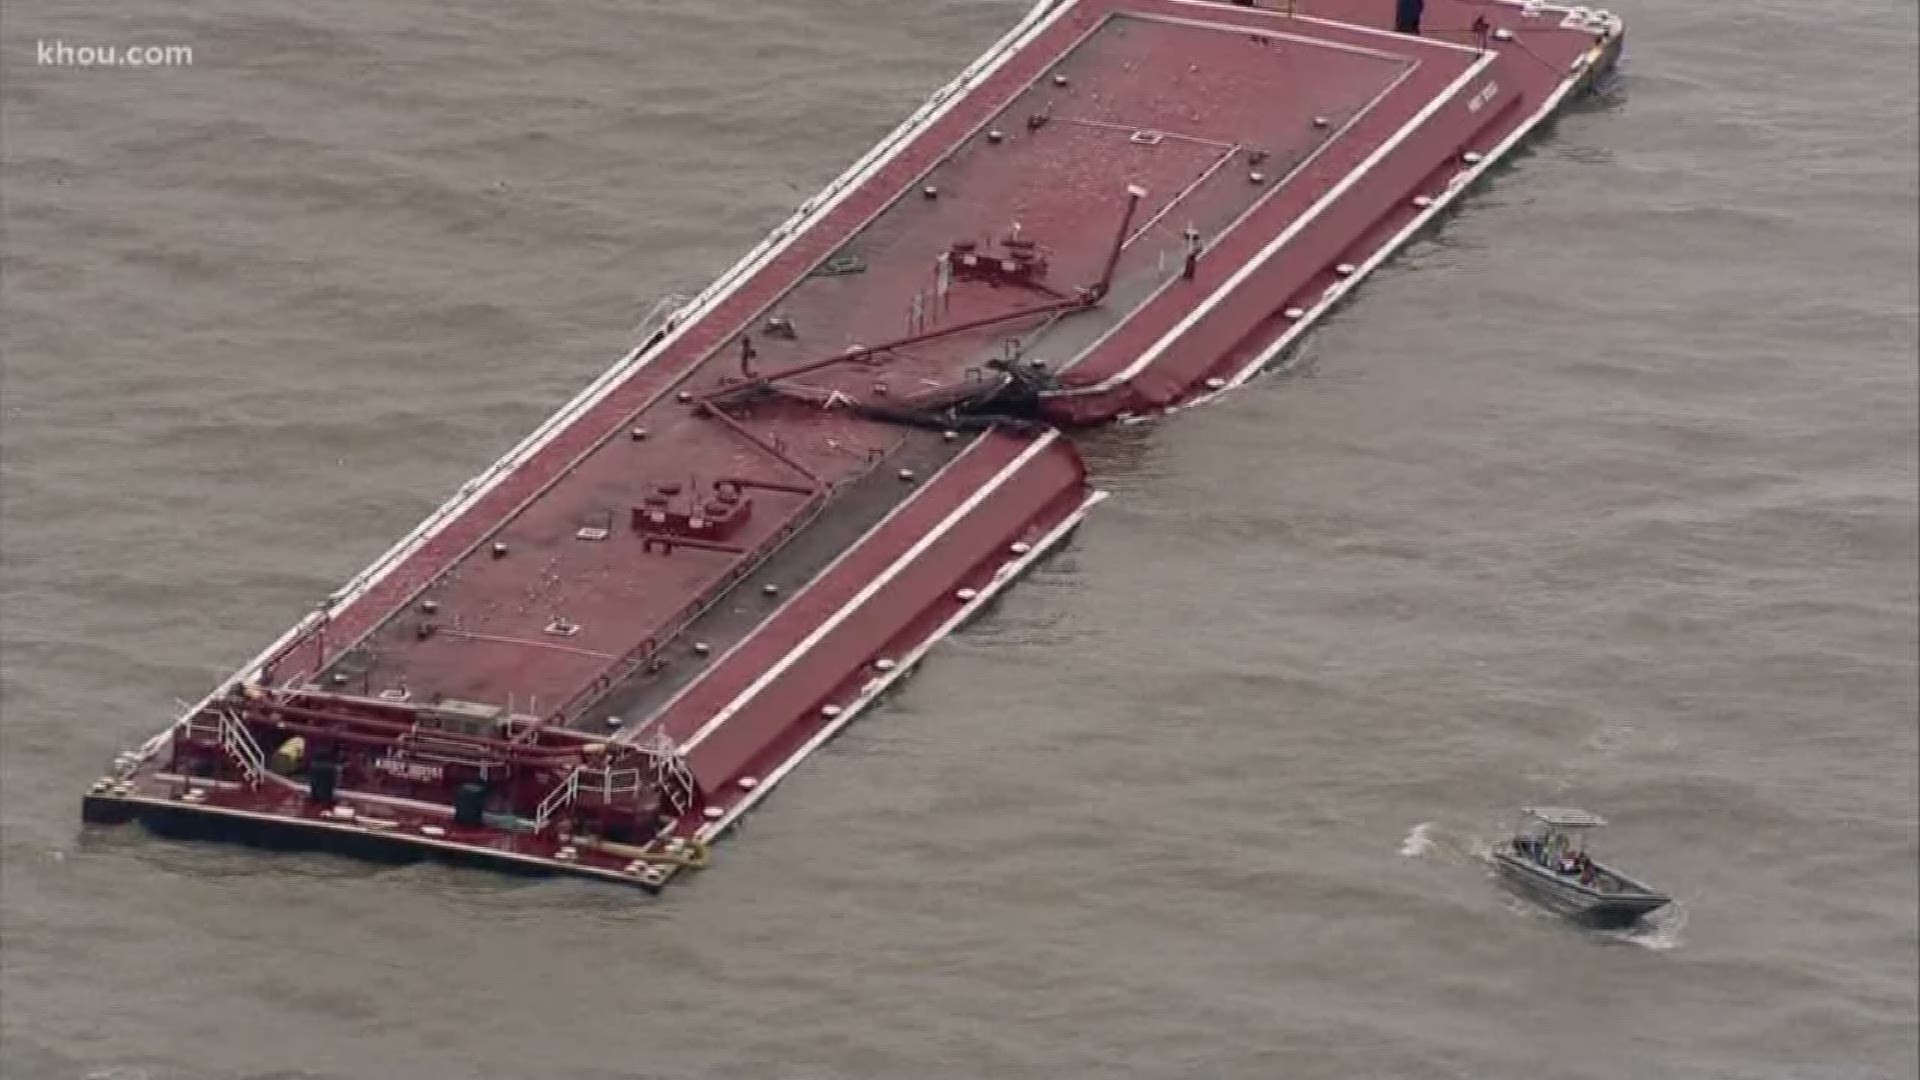 The Coast Guard and state environmental agency are responding to a collision at the Houston Ship Channel, which spilled products used to make gasoline.